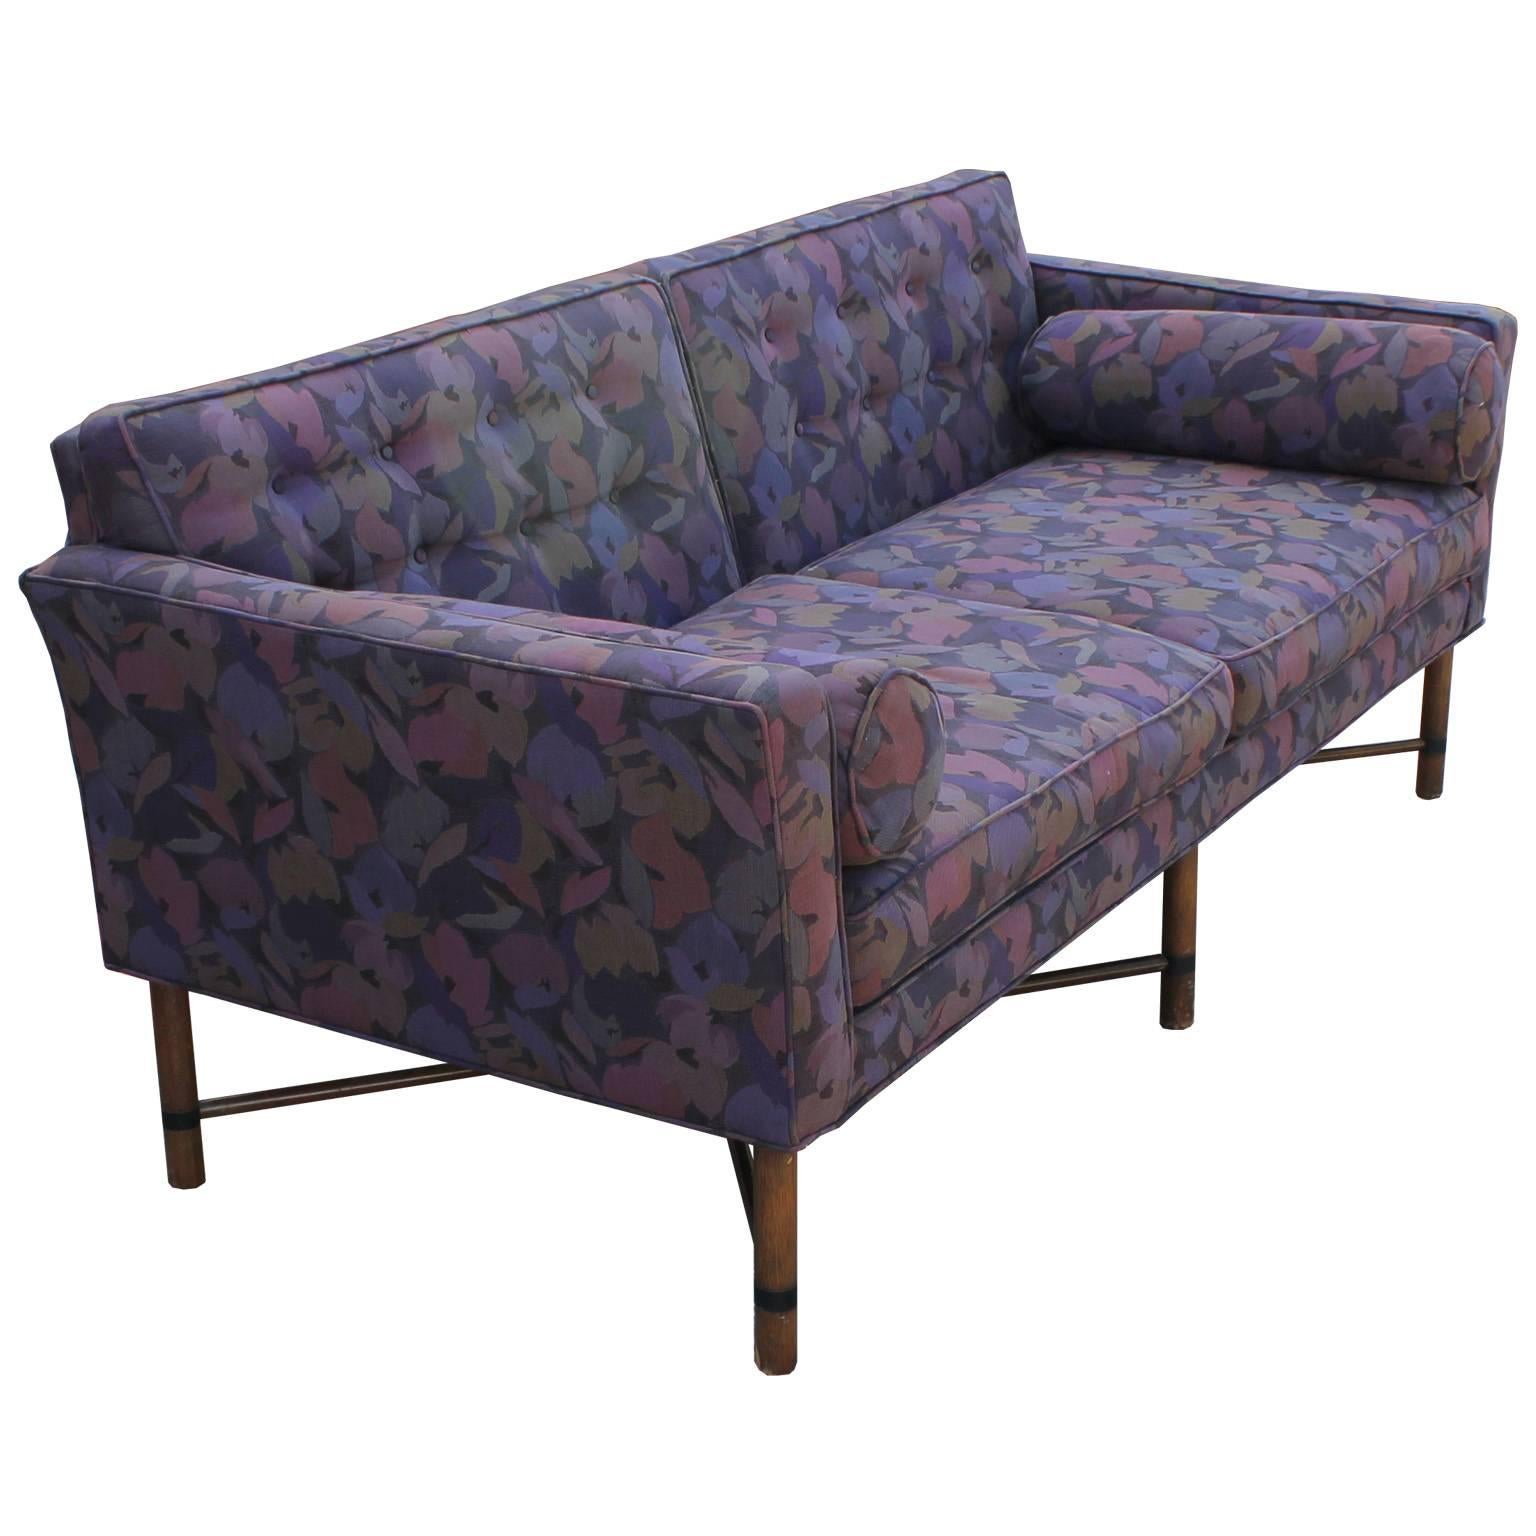 Brass Harvey Probber Seating Group Vintage Modern Sofa and Loveseat in Purple Floral